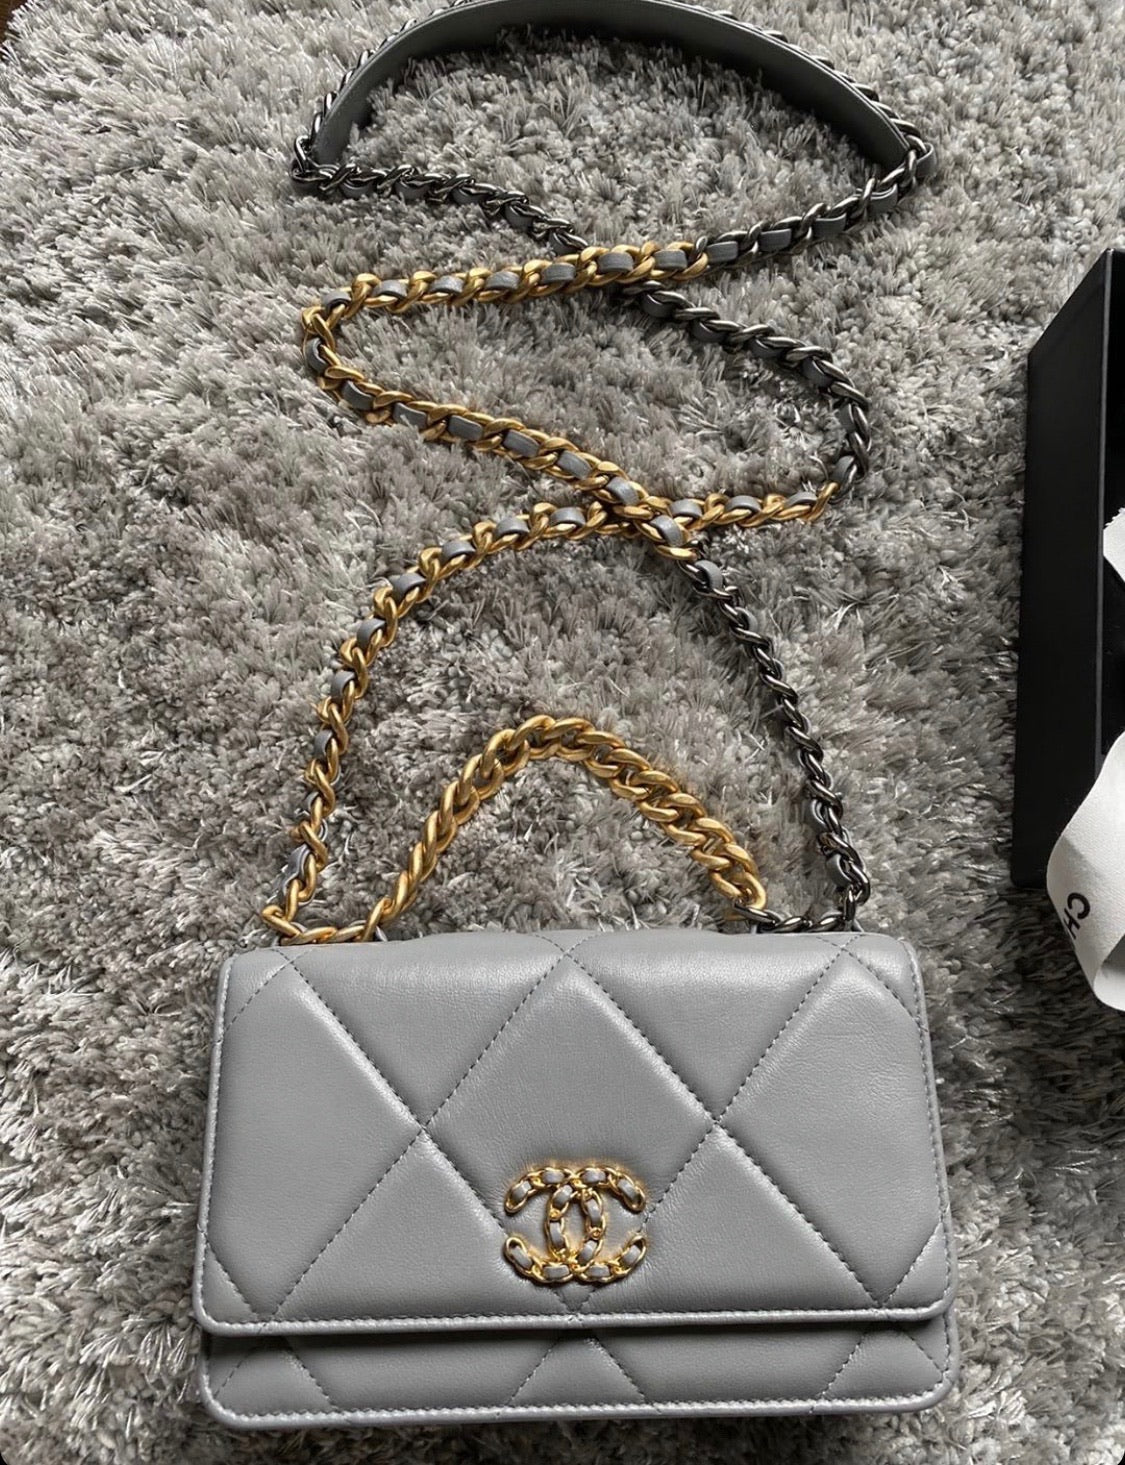 Chanel 19 woc – Beccas Bags